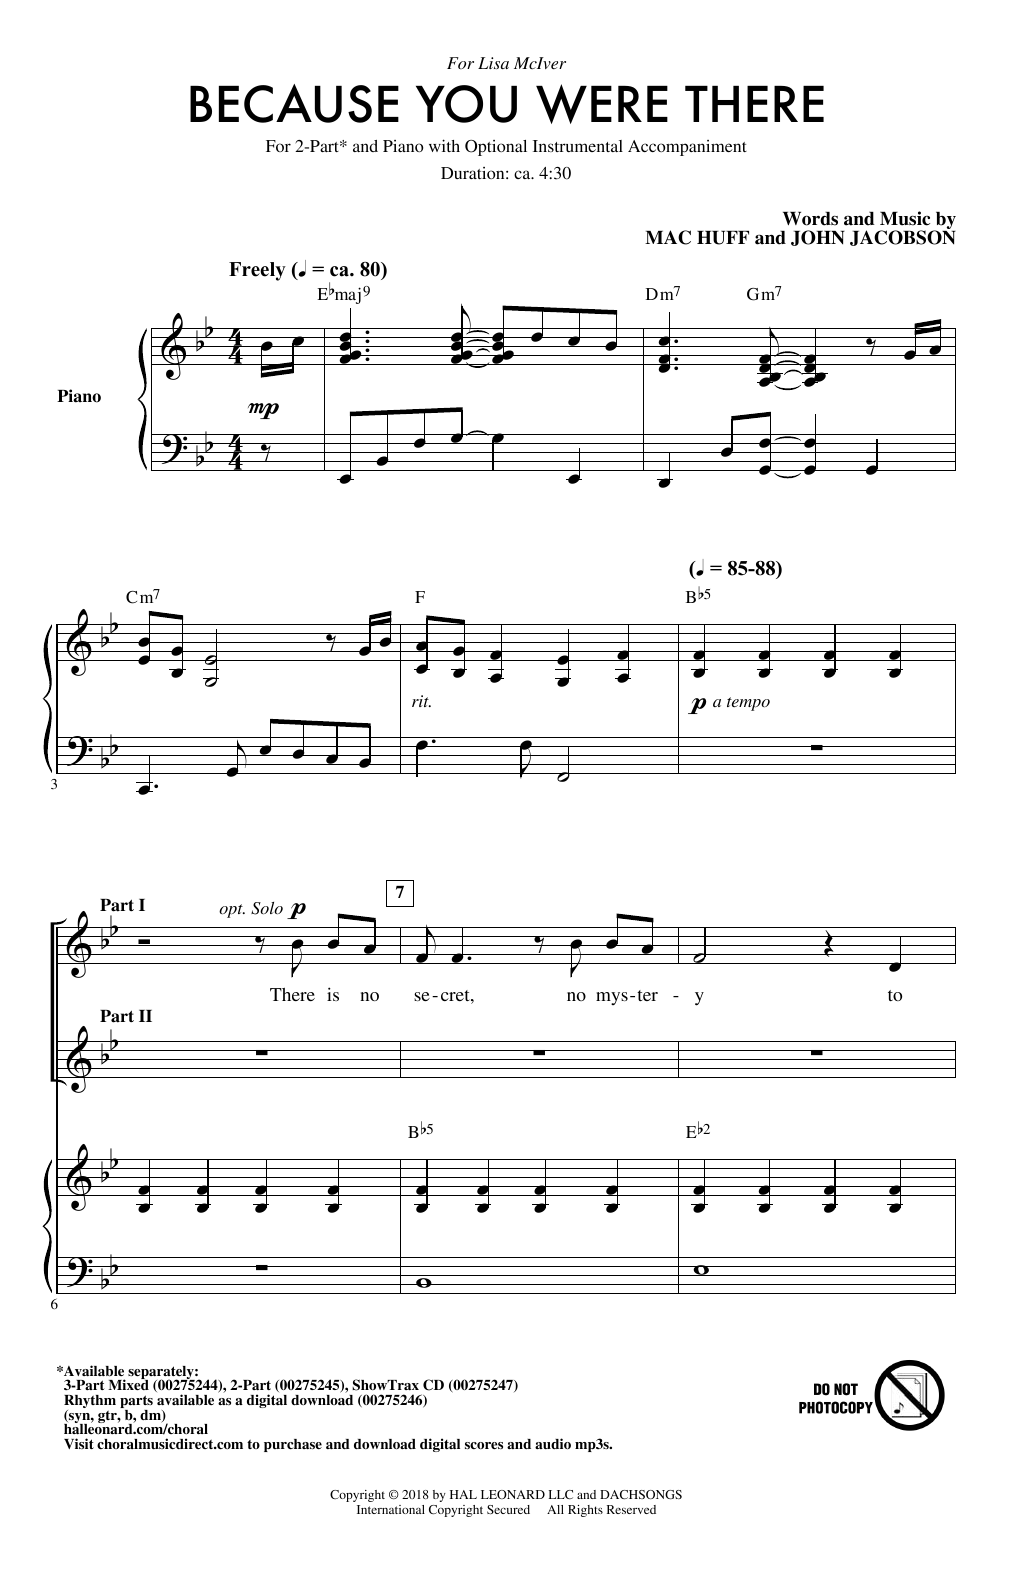 Download Mac Huff Because You Were There Sheet Music